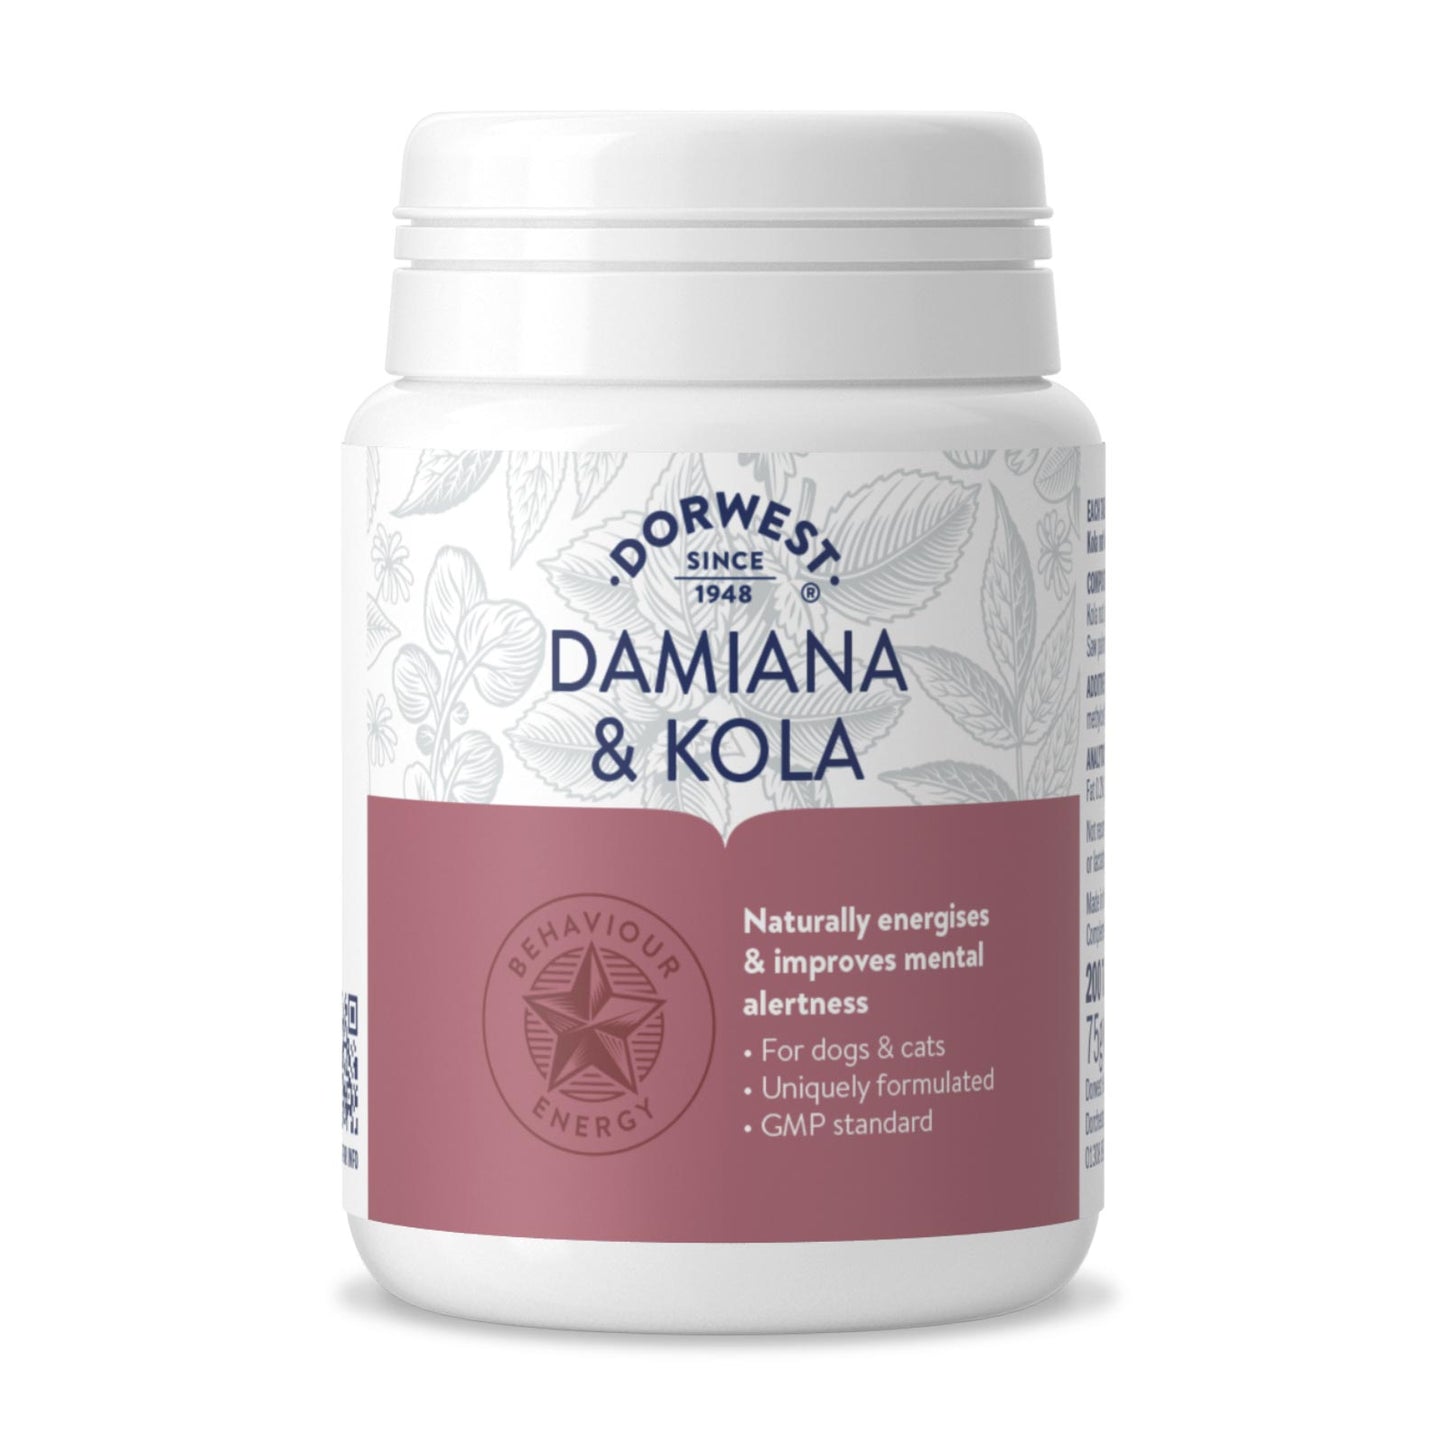 Dorwest Damiana & Kola Tablets For Dogs And Cats (For Alterness, Vitality & Stamina)